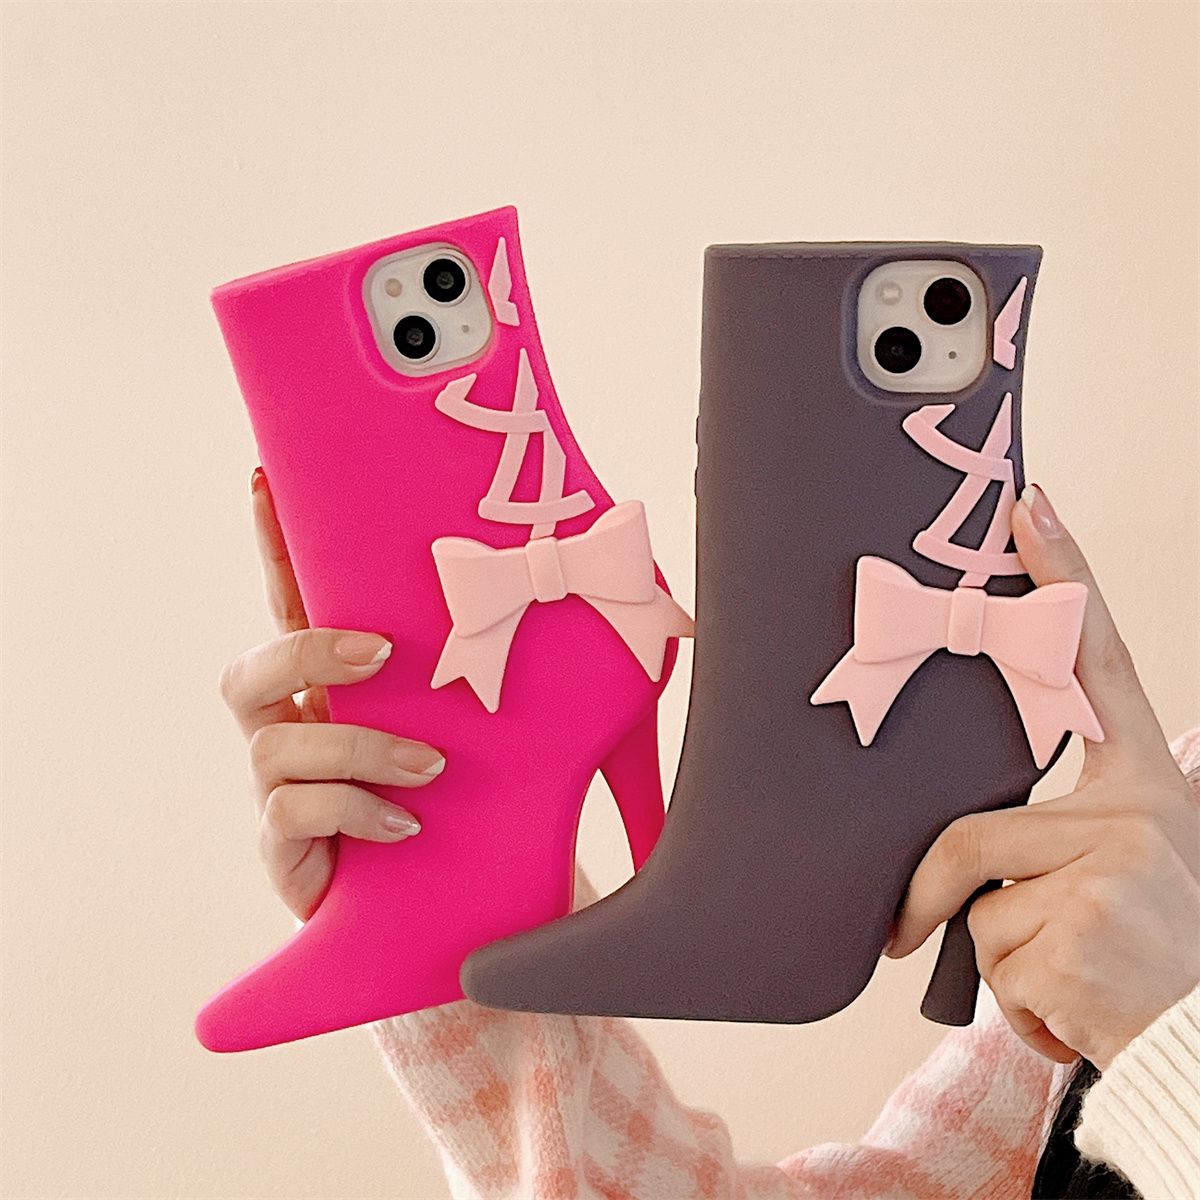 High-heeled Shoes Phone Case - iPhone Case